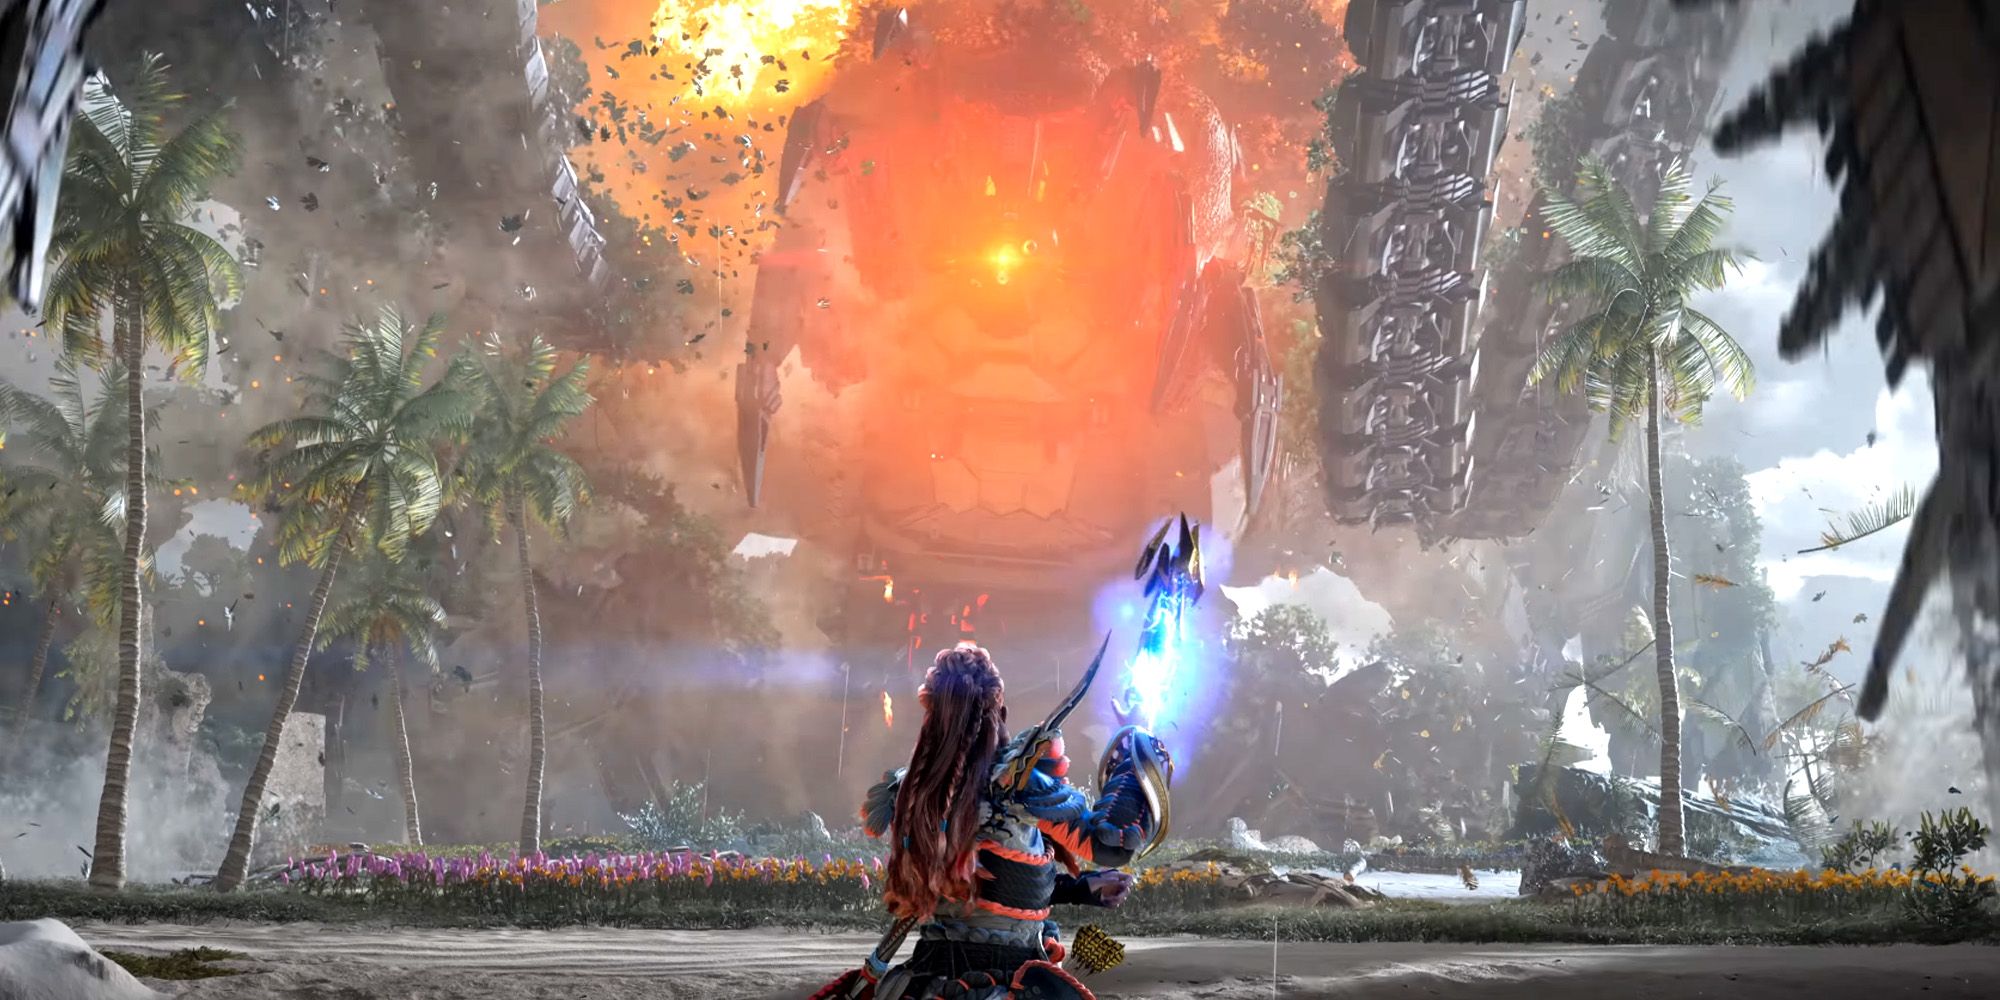 Aloy coming face-to-face with the giant Horus machine in Horizon Forbidden West: Burning Shores.